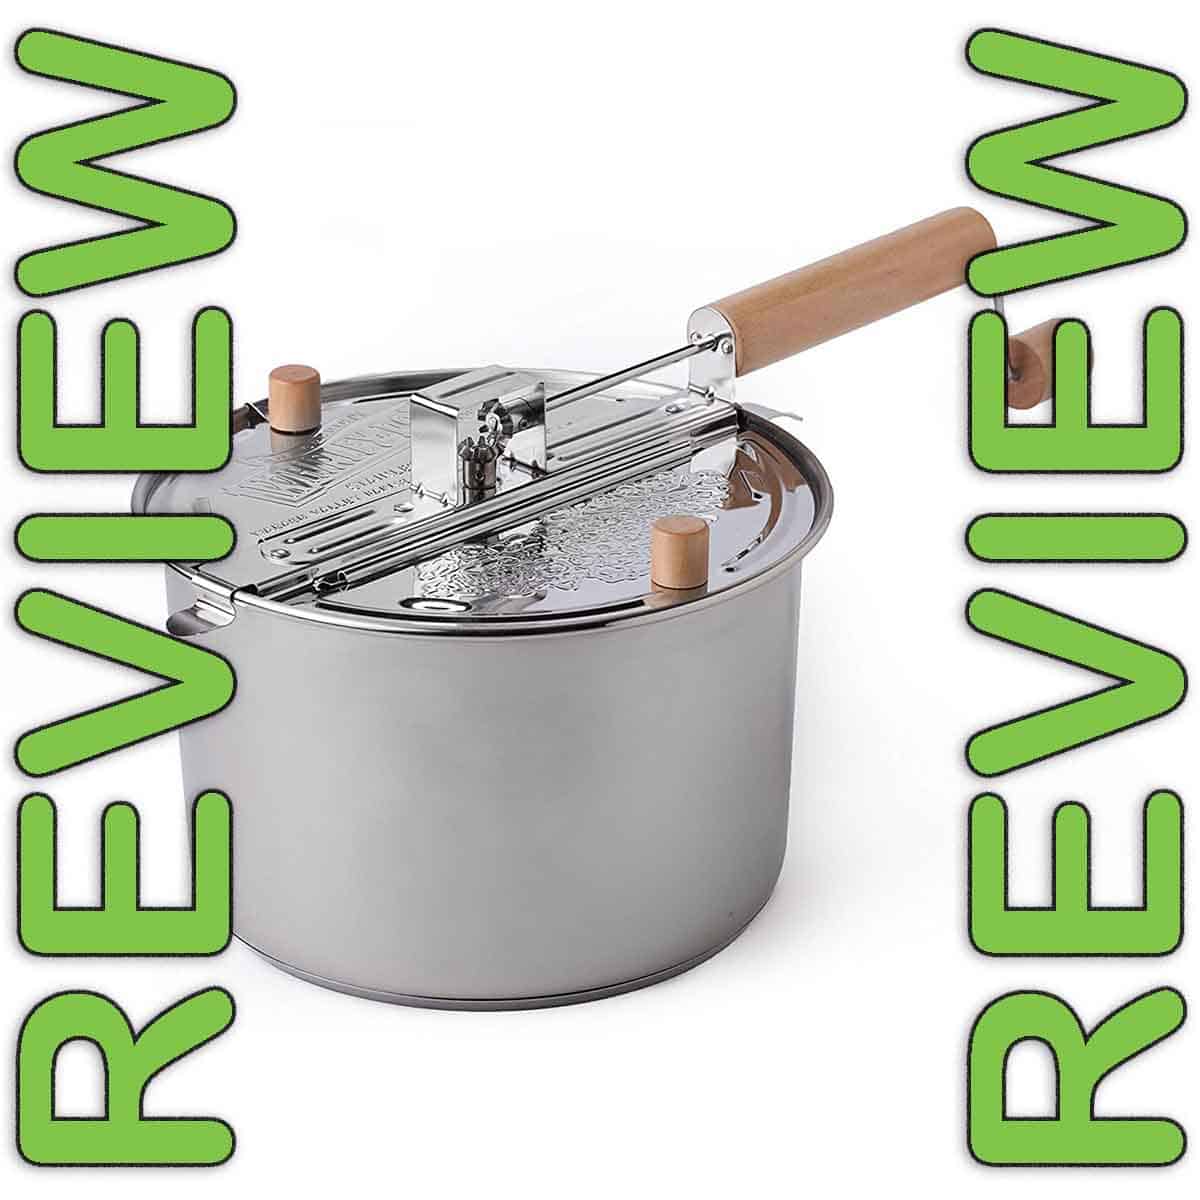 https://leelalicious.com/wp-content/uploads/2023/01/Stovetop-Popcorn-Poppers-Review.jpg